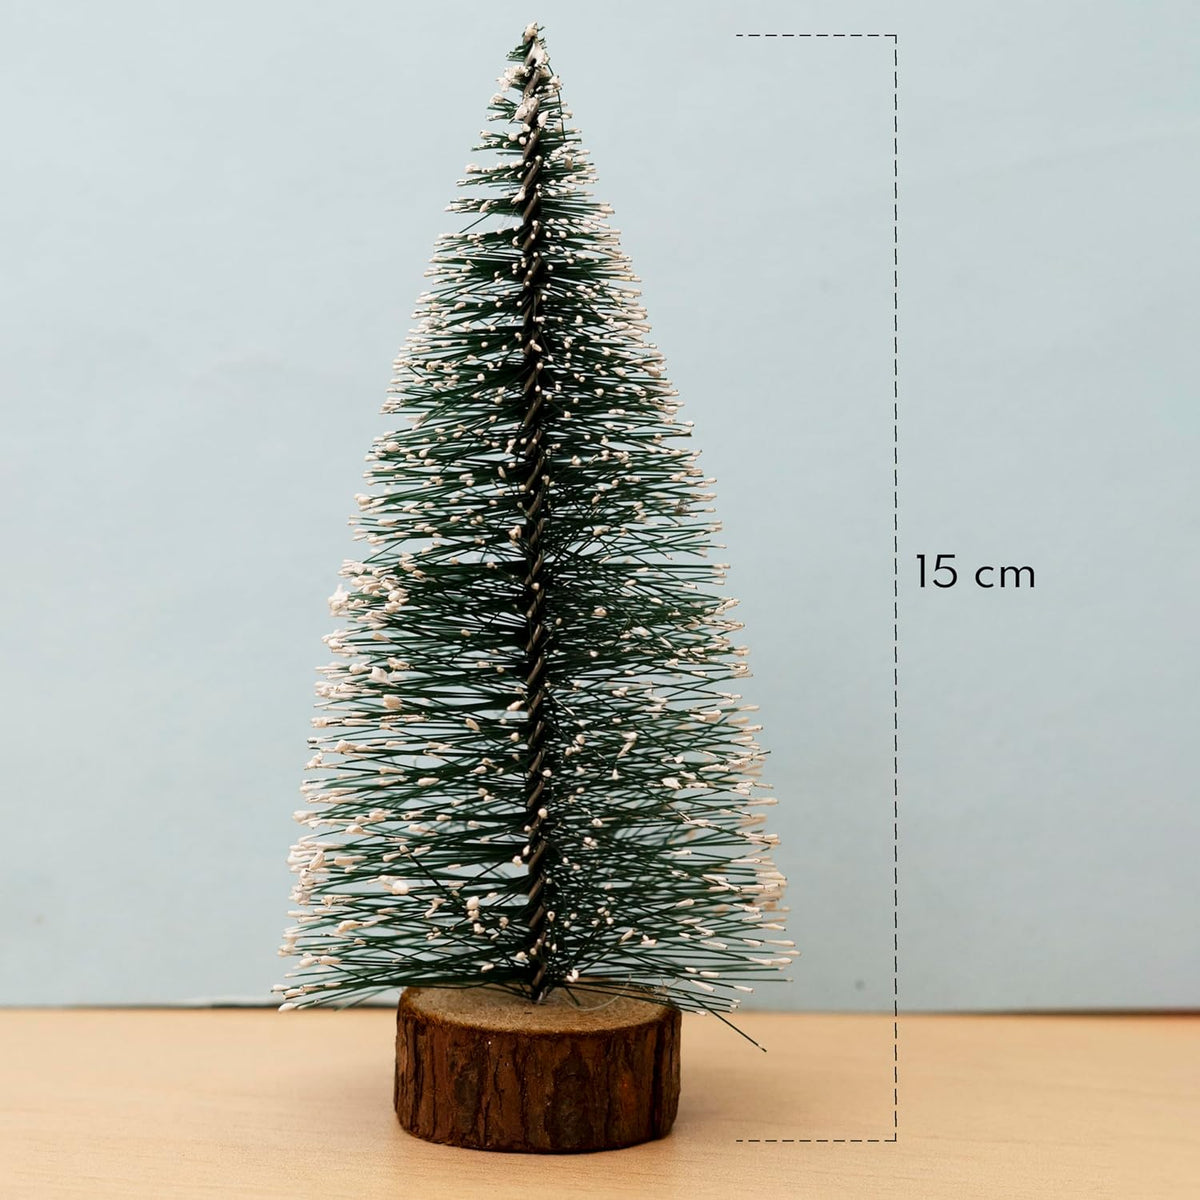 Christmas Tree with Snow & 2 Scented Candles | 15 cm Long, 1 Tree with Wooden Base & 2 Scented Candles | for Home Decor, Gifting & Christmas